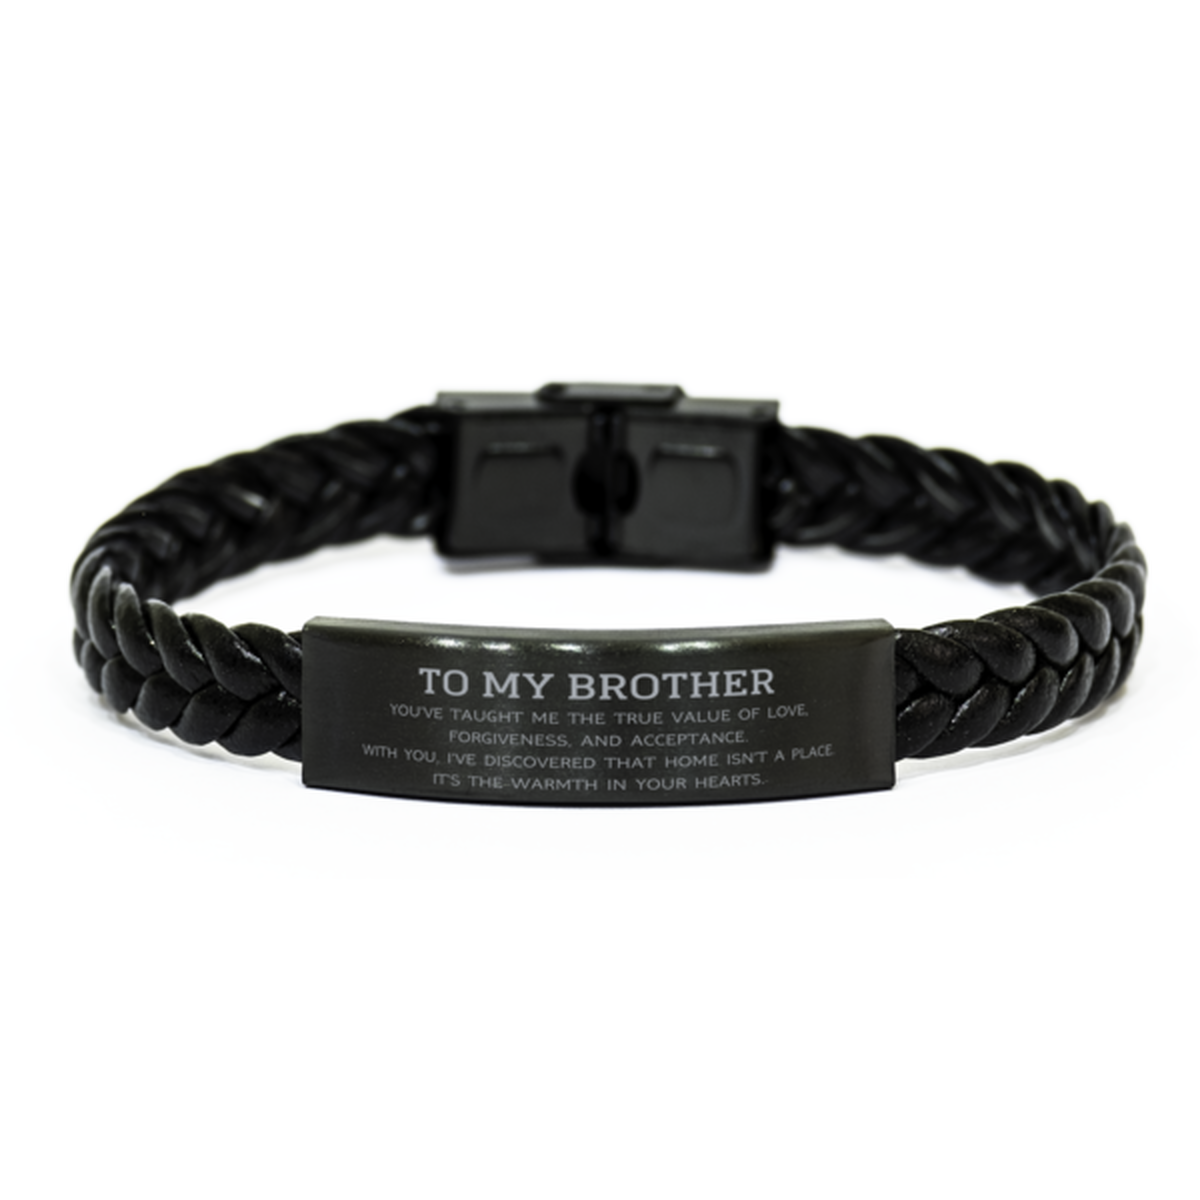 To My Brother Gifts, You've taught me the true value of love, Thank You Gifts For Brother, Birthday Braided Leather Bracelet For Brother